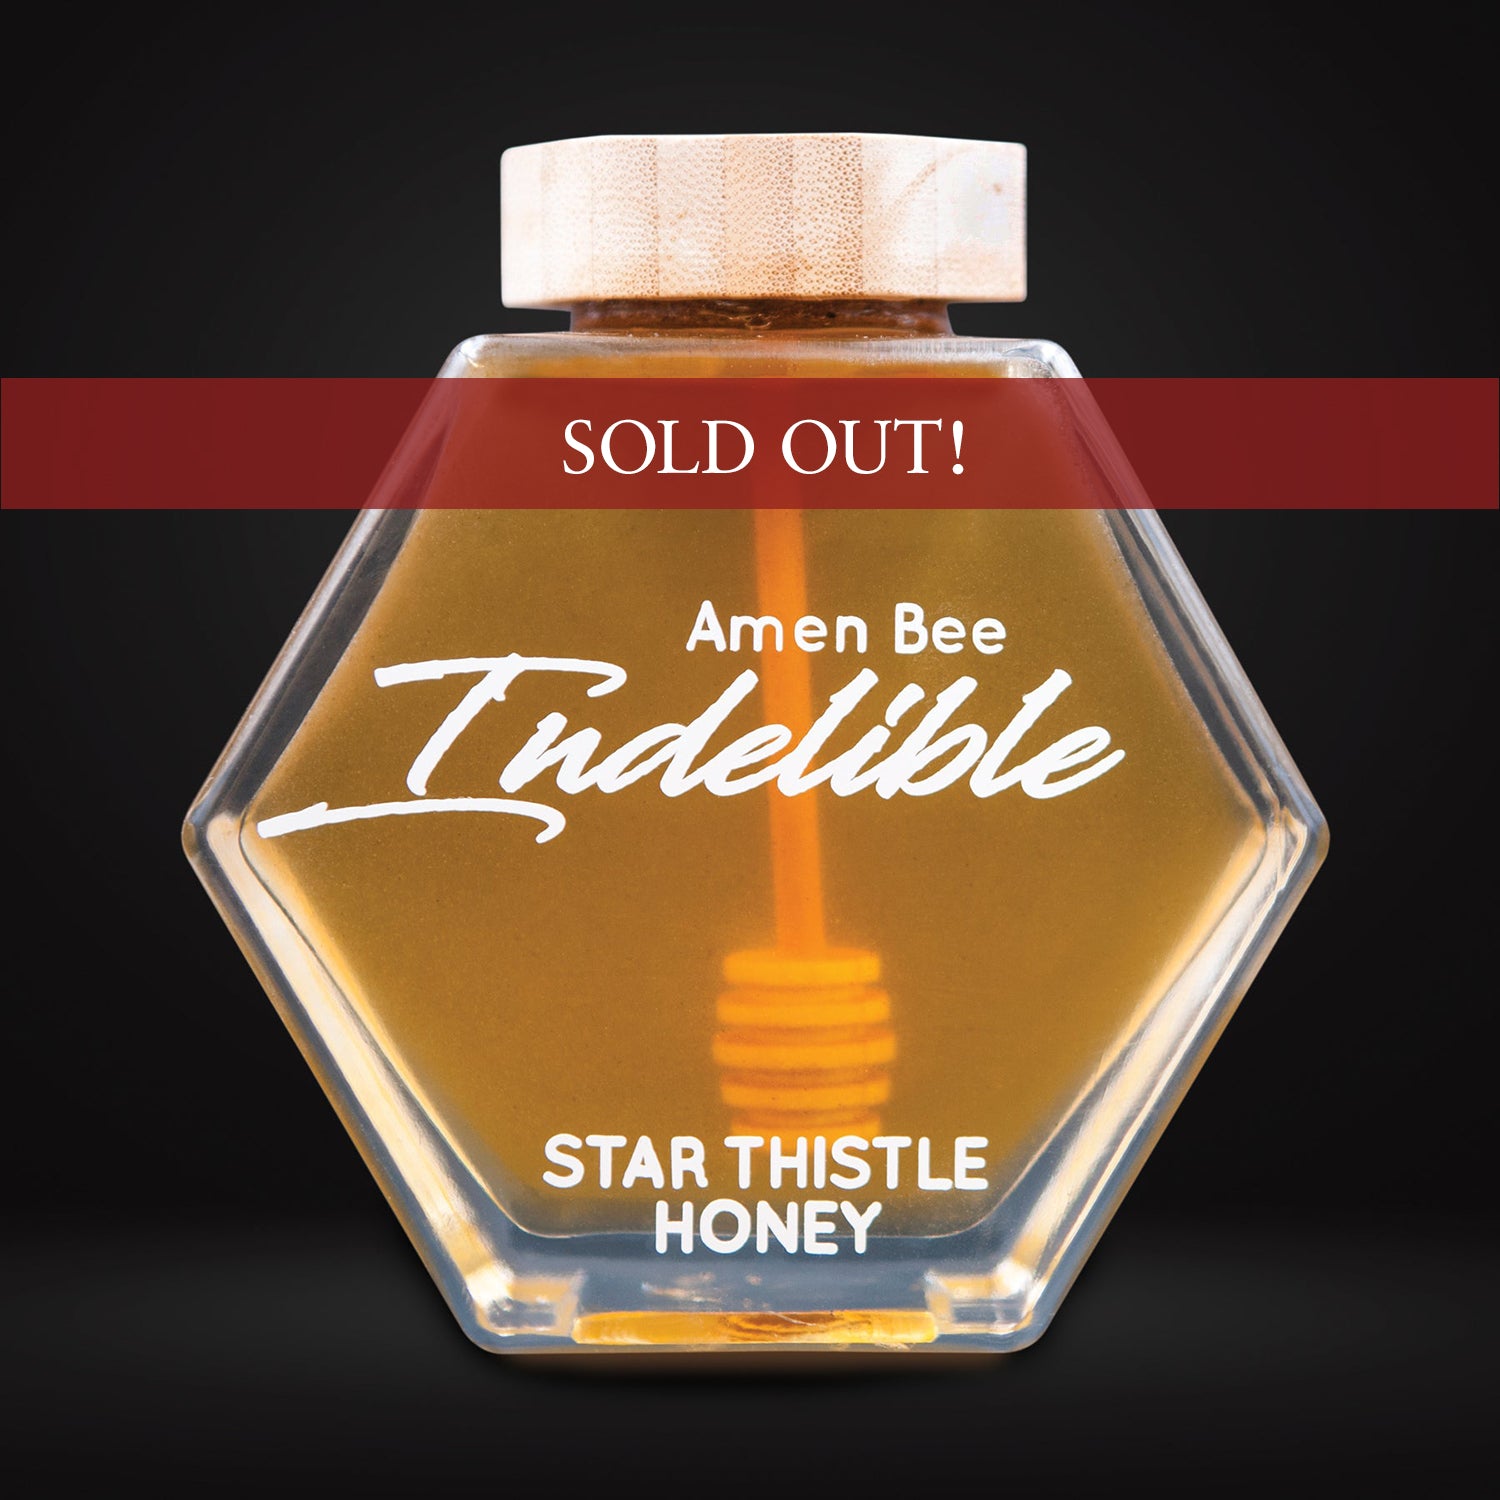 Indelible Honey – Star Thistle